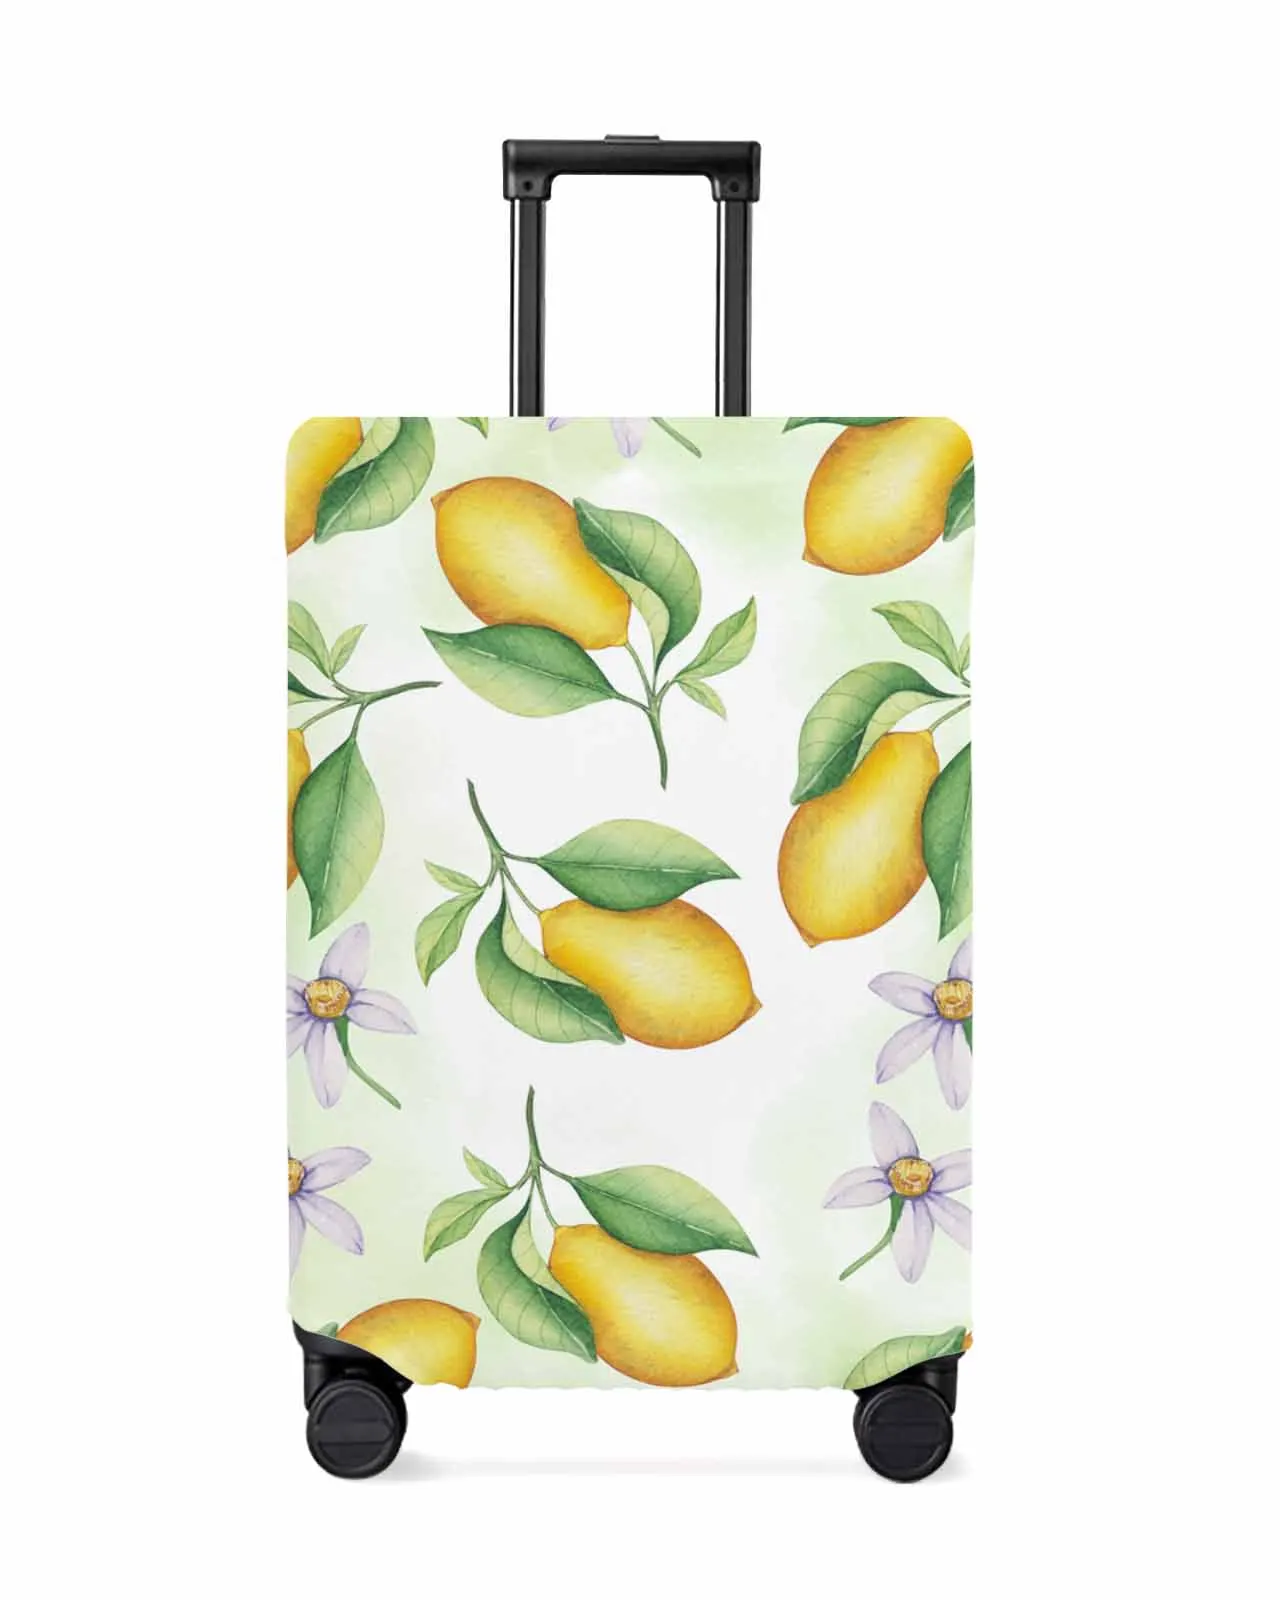 

Lemon Purple Flowers Summer Green Countryside Stretch Suitcase Protector Baggage Dust Case Cover For 18-32 Inch Travel